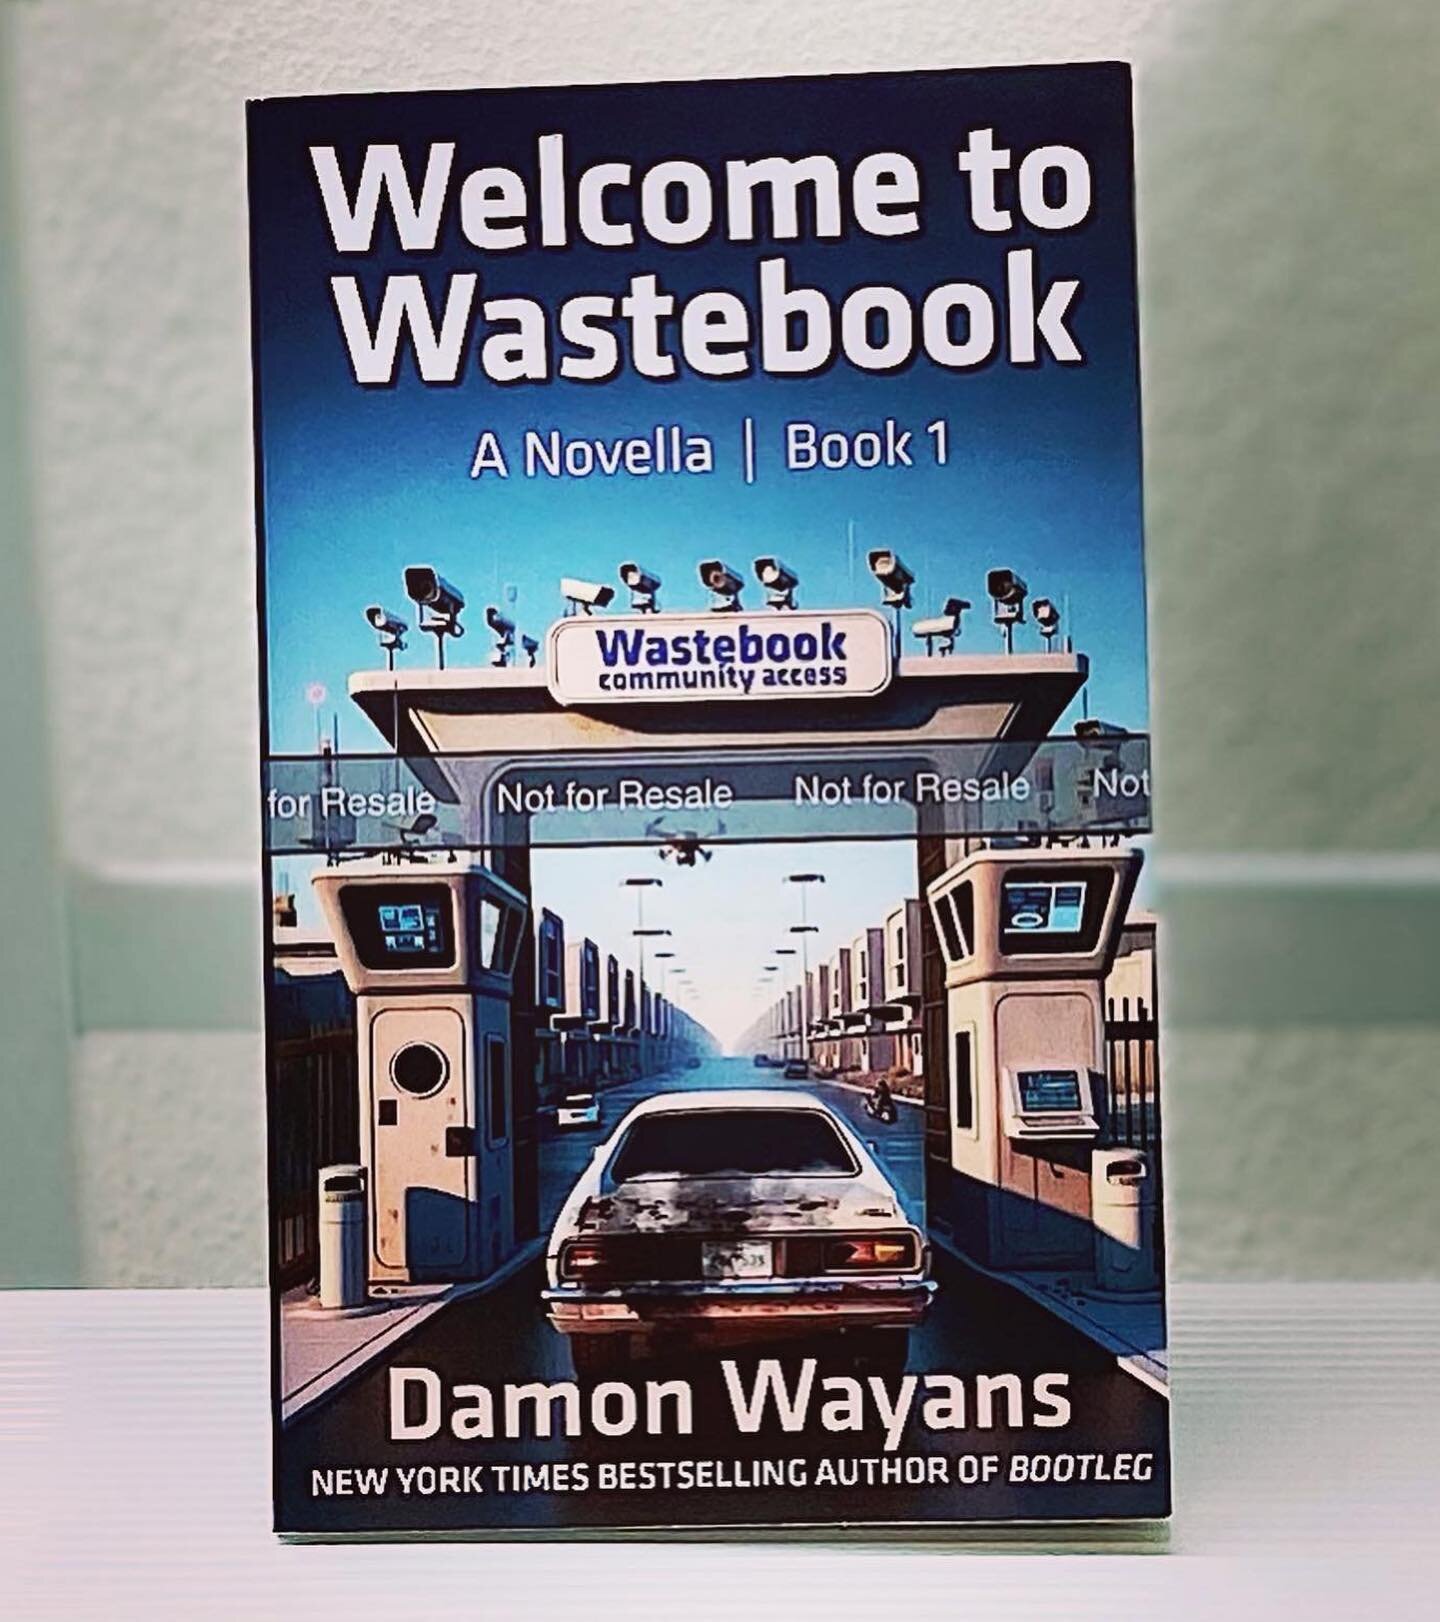 Hey Guys! Go check out my first book in this new series Welcome to Wastebook! Read, enjoy and post your reviews. Link in bio